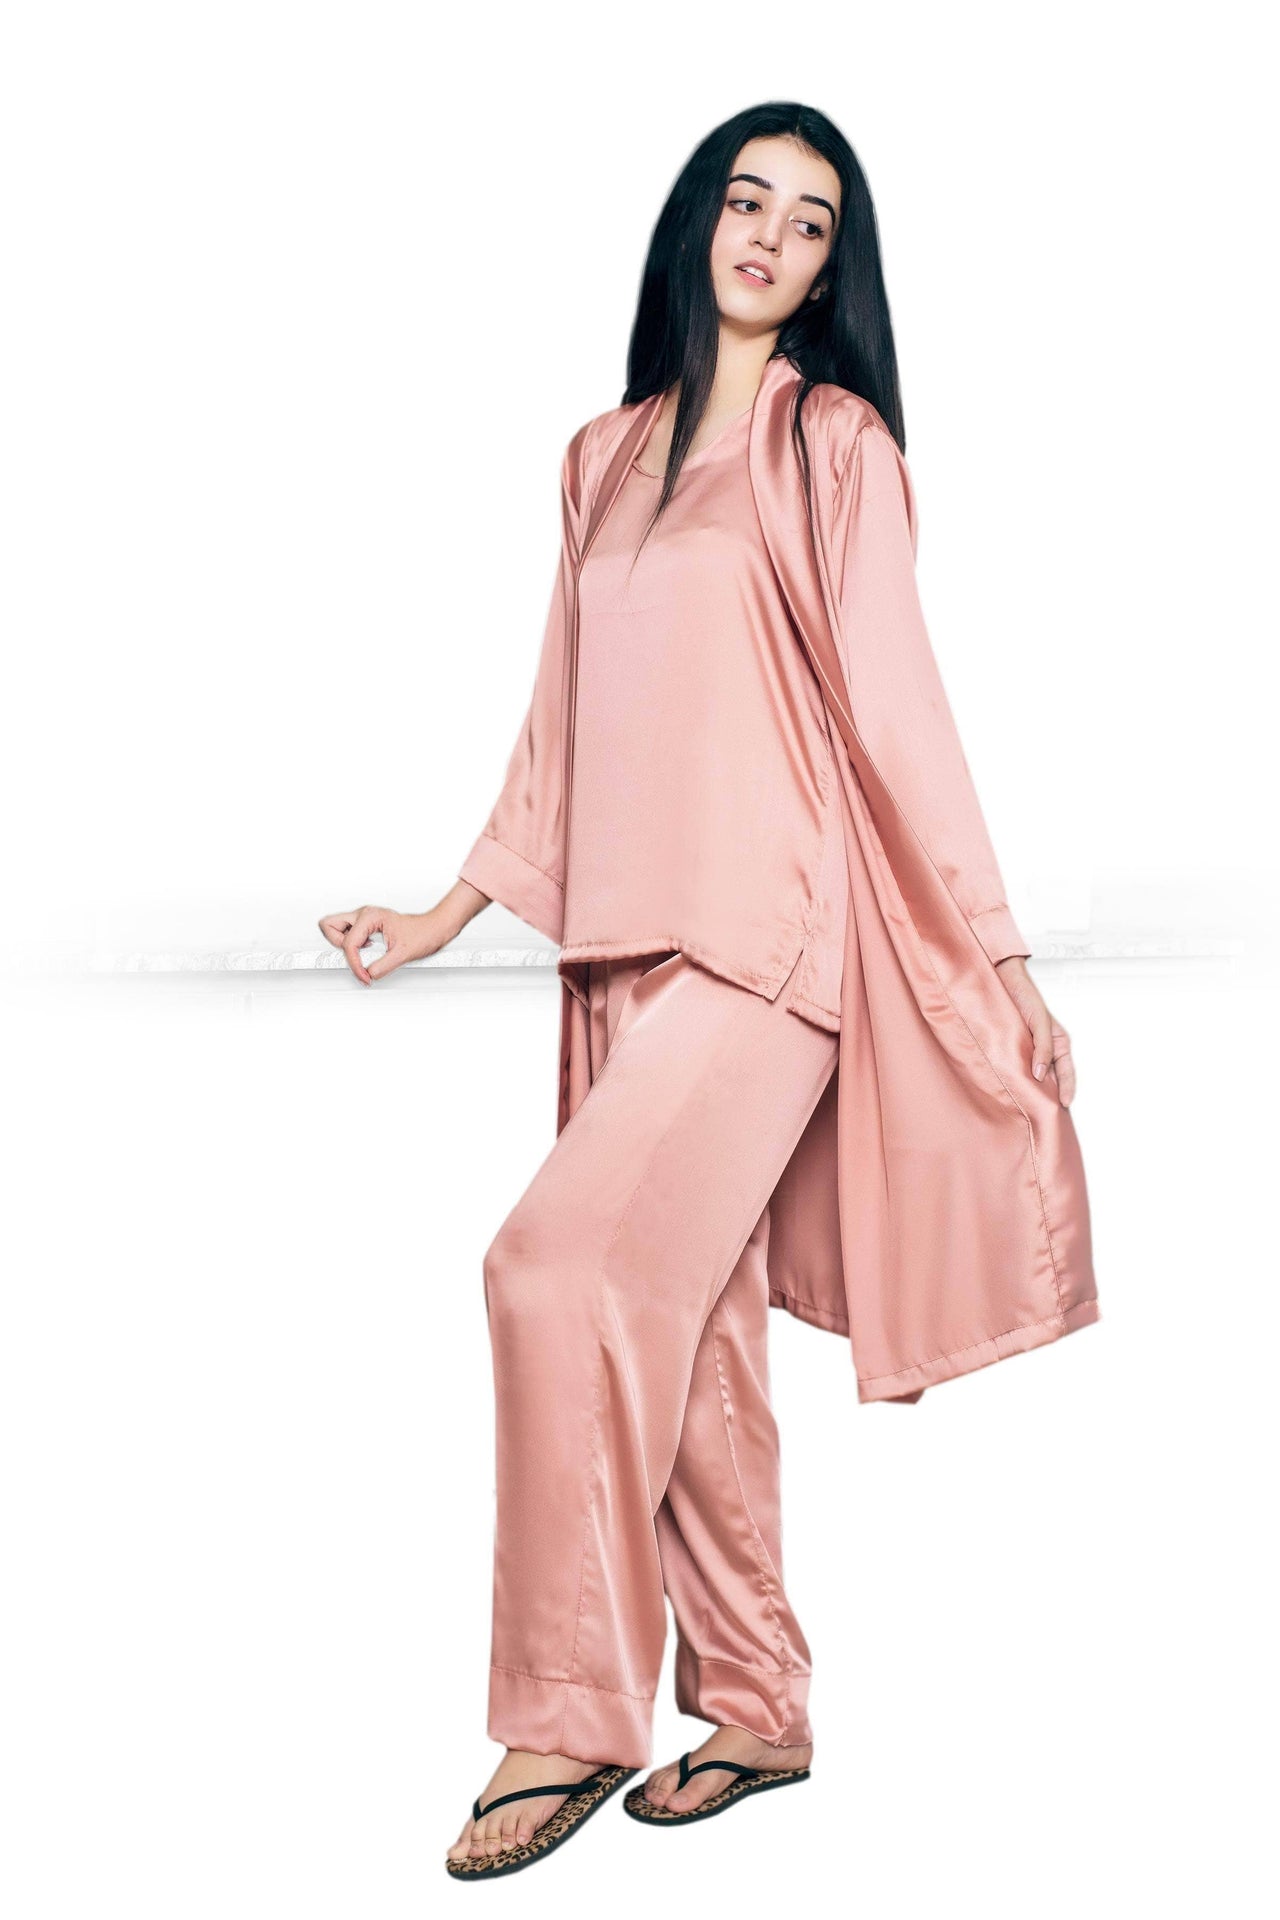 Elora by M Silk Robe Set Silk 3 Piece Robe Set (Available in 7 Colors)